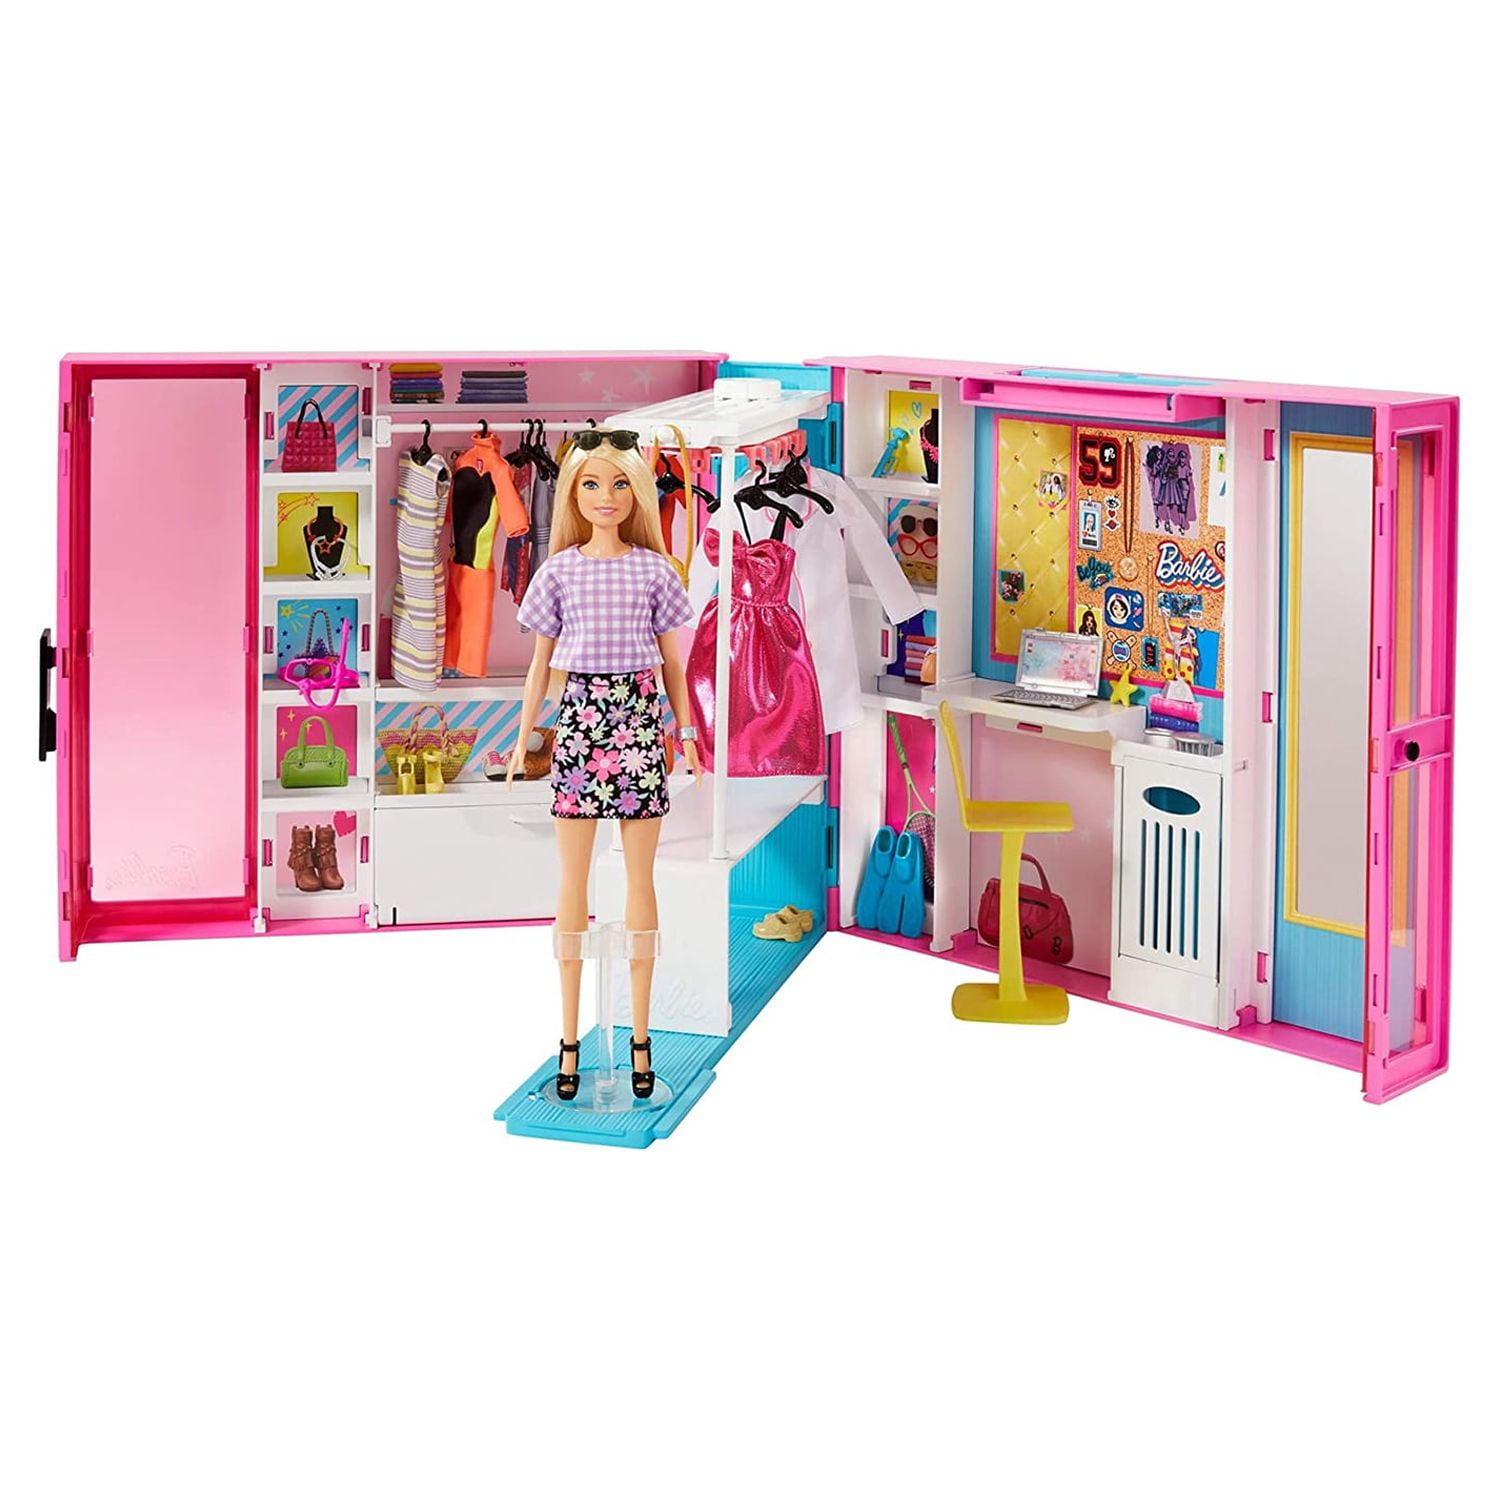 What do we think about this new Barbie closet : r/Barbie